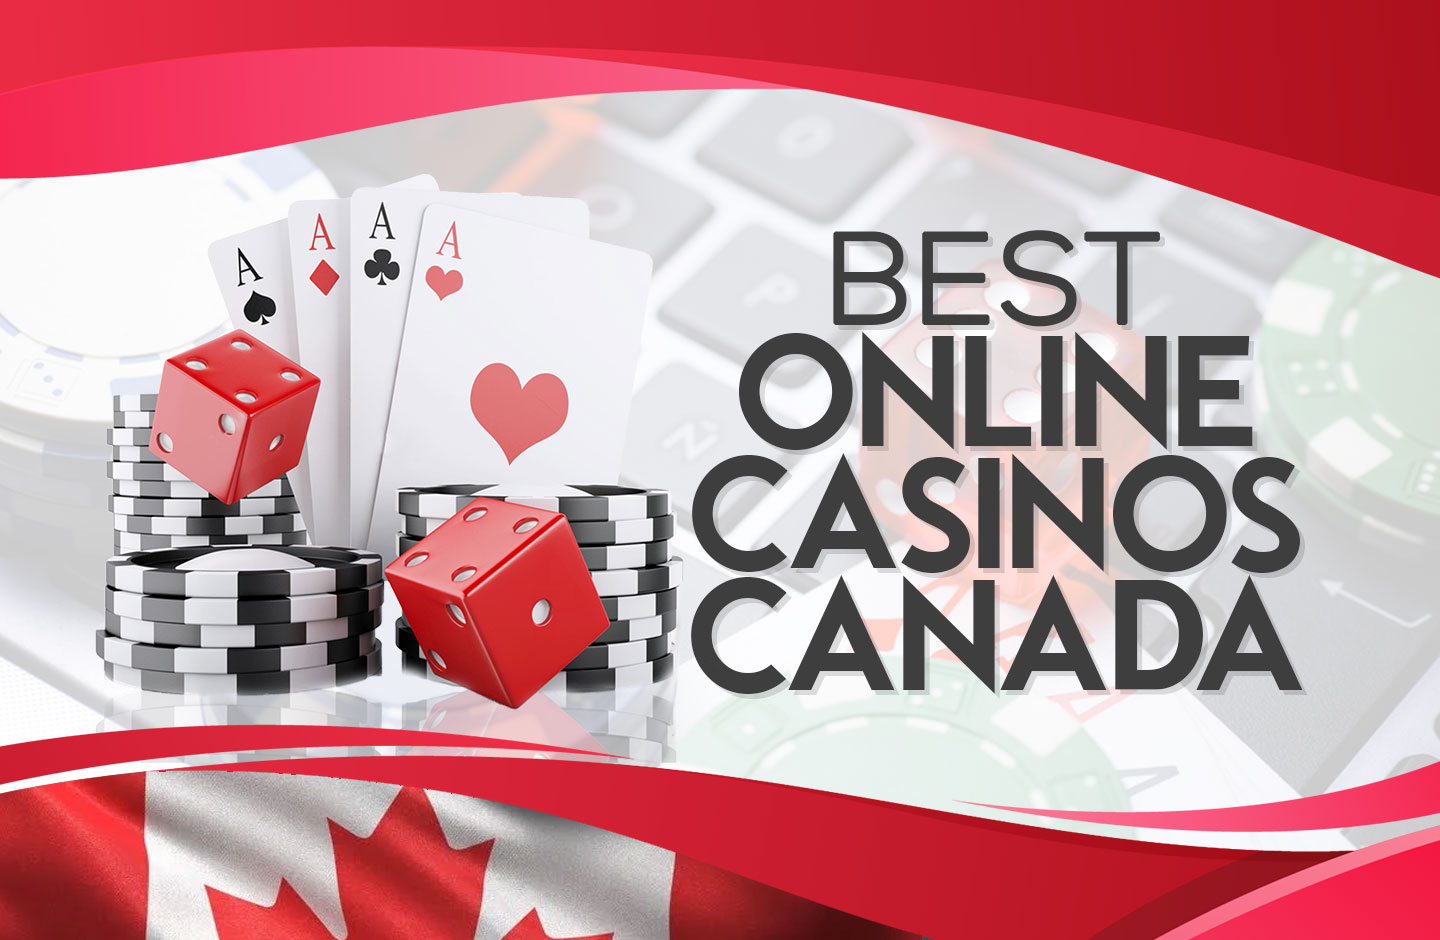 Cats, Dogs and online casino no deposit